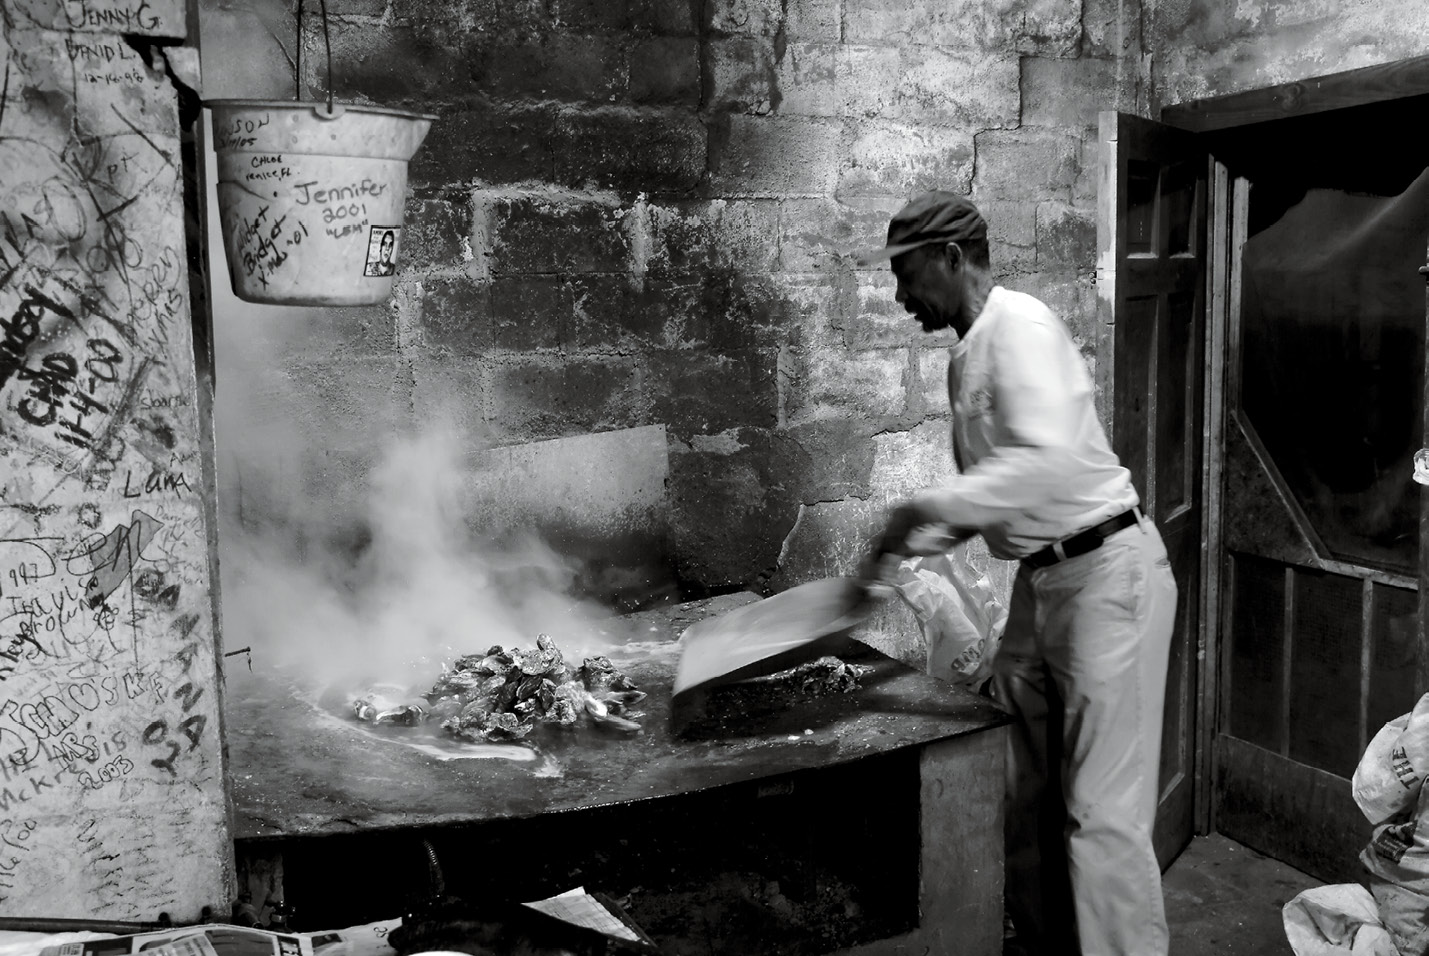 Dedicated oyster cook Henry Gilliard stoked fires and roasted clusters in the oyster room from 1995 to 2011; photograph by Cramer Gallimore